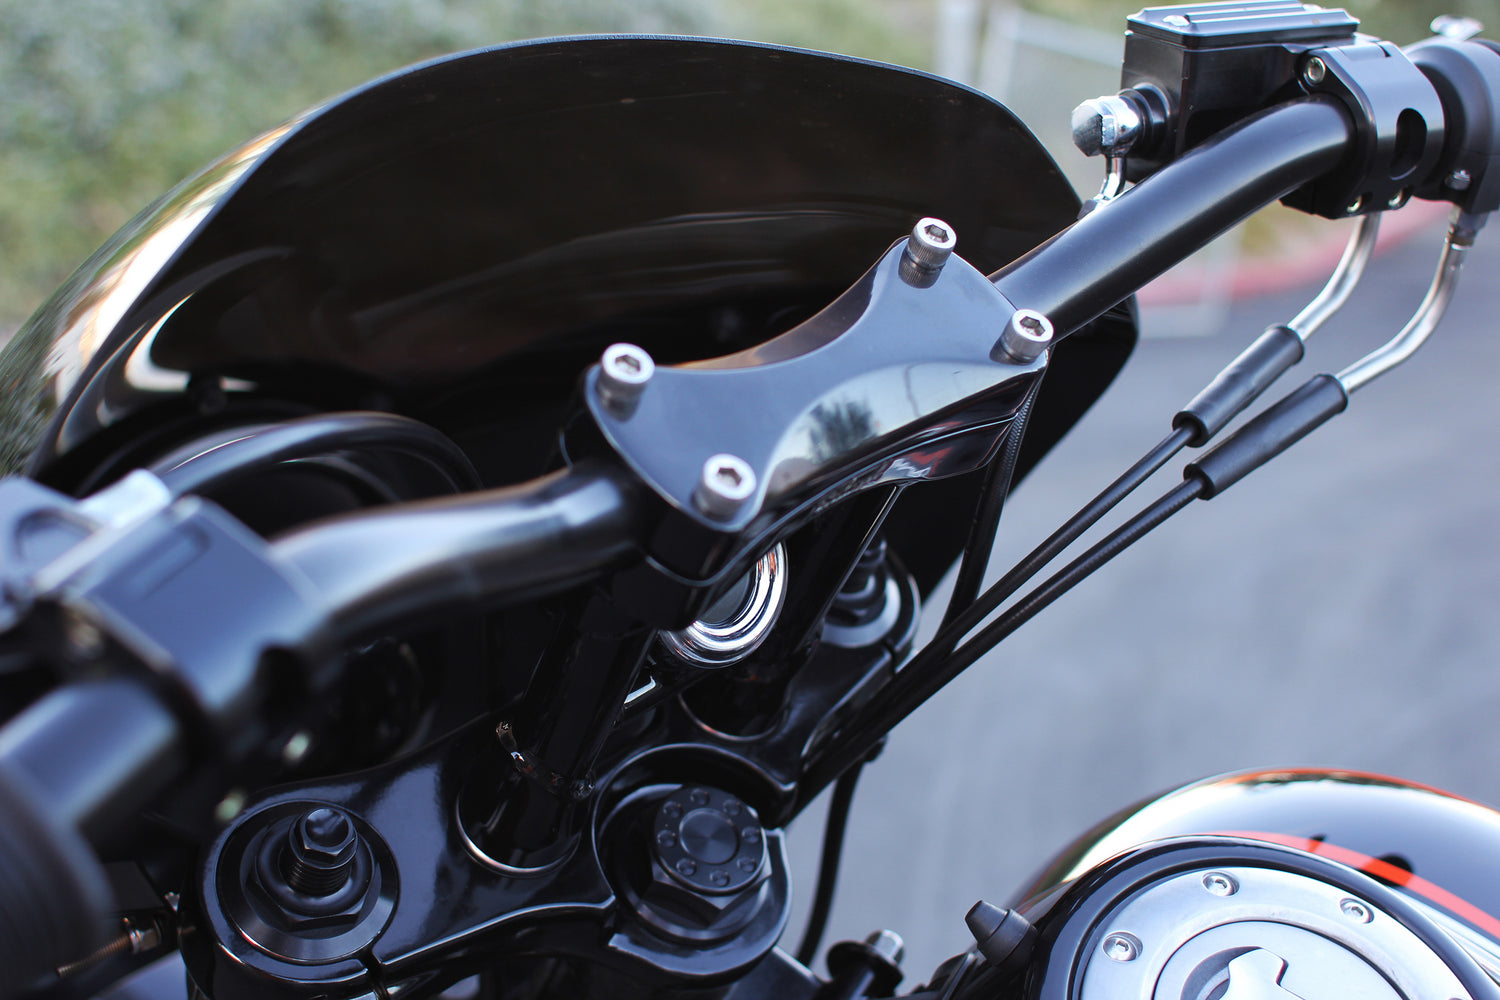 |on-the-road-again|foot-peg-pic|Pegs-Sanderson-black-angle_color|Tracker-10in-Murdock_black-angle_color|||||Biltwell Black